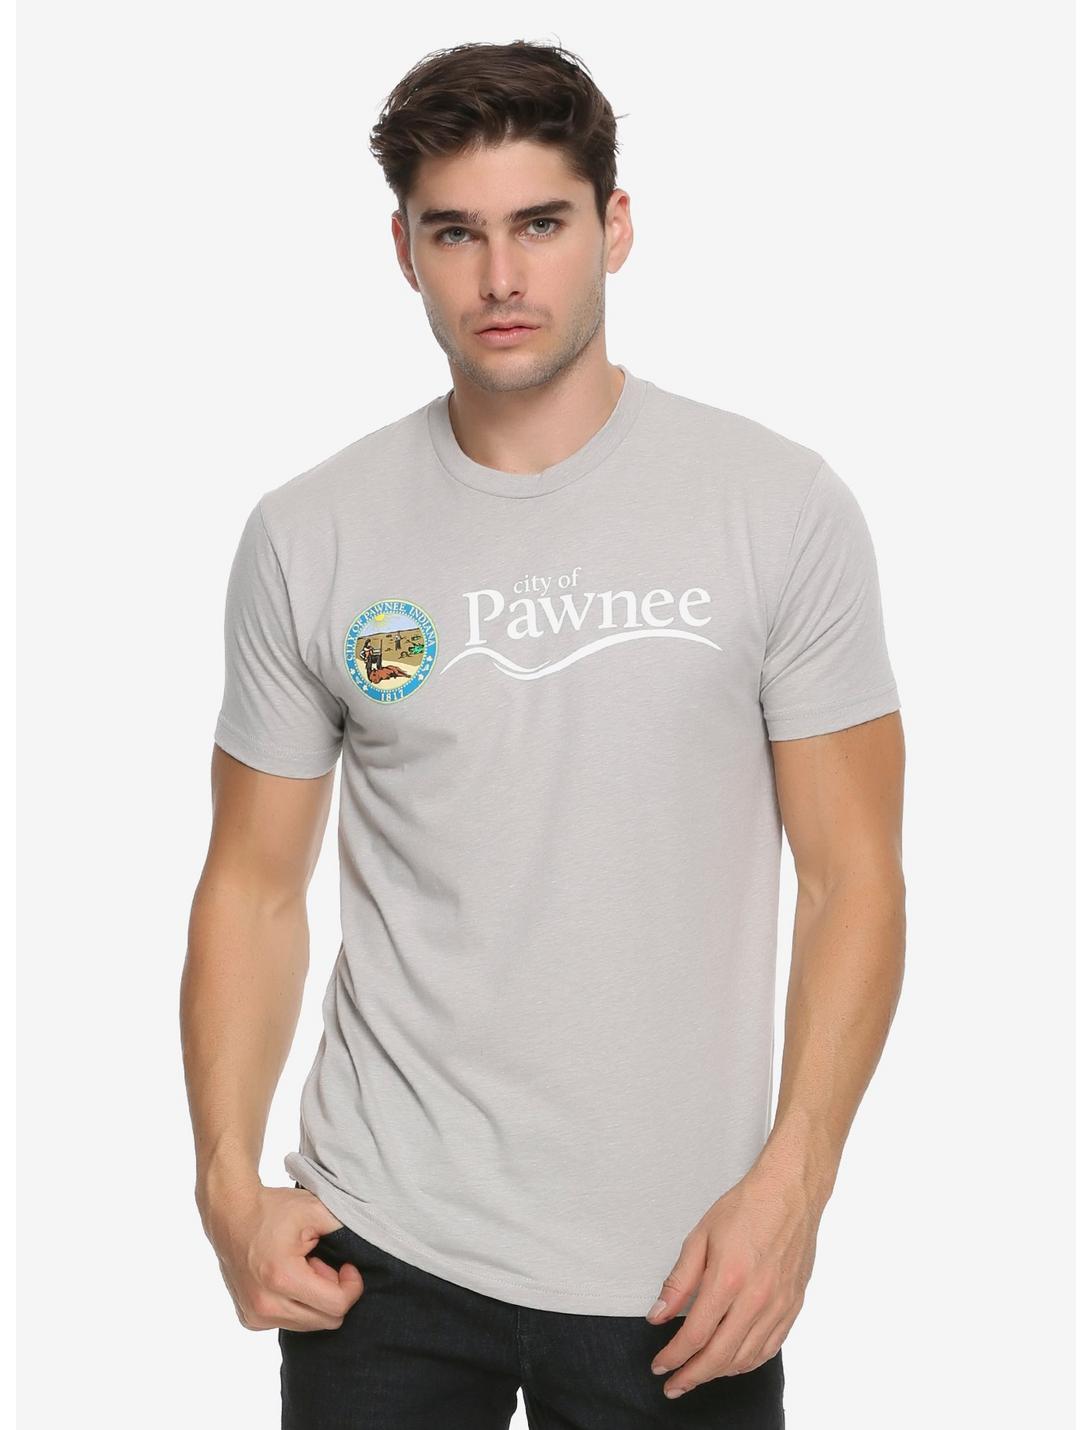 Parks And Recreation City Of Pawnee T-Shirt, BLUE, hi-res